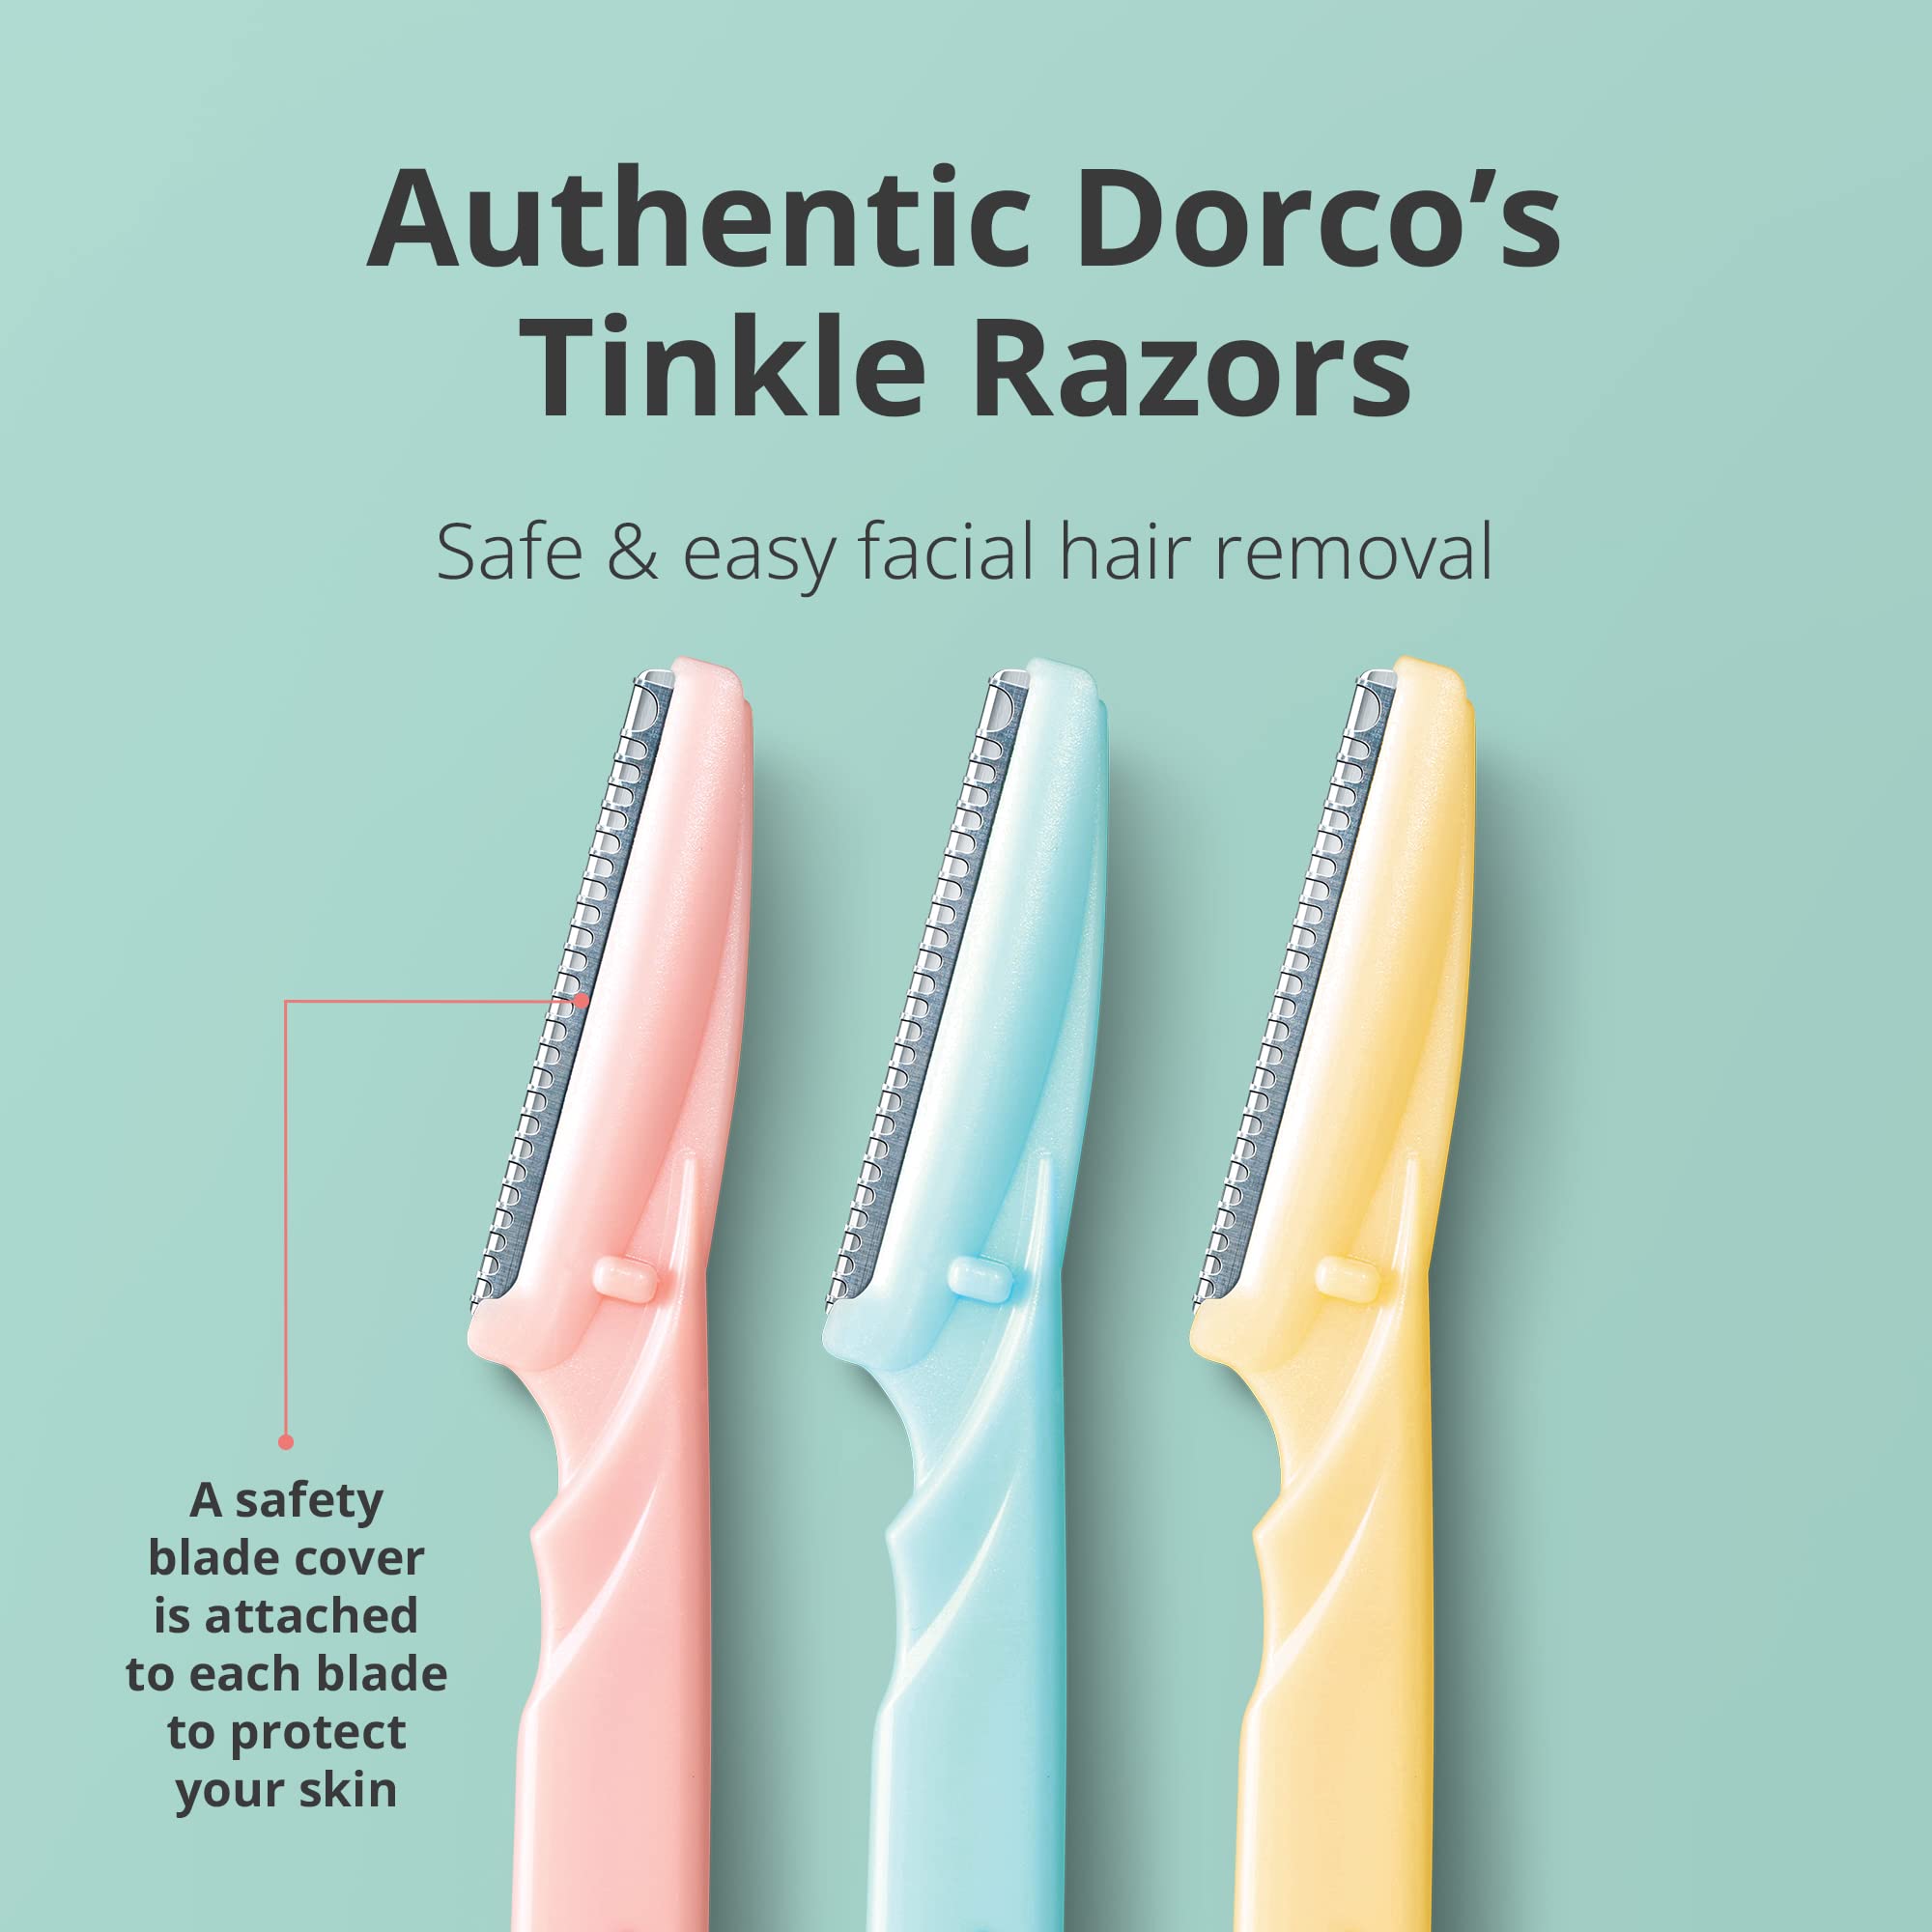 Dorco Tinkle Eyebrow Razors for Women, 6 Razors , Eyebrow Trimmer Dermaplaning Tool for Safe and Easy Facial Hair Removal for Women, Exfoliating Face With Stainless Steel Safety Cover for Sensitive Skin